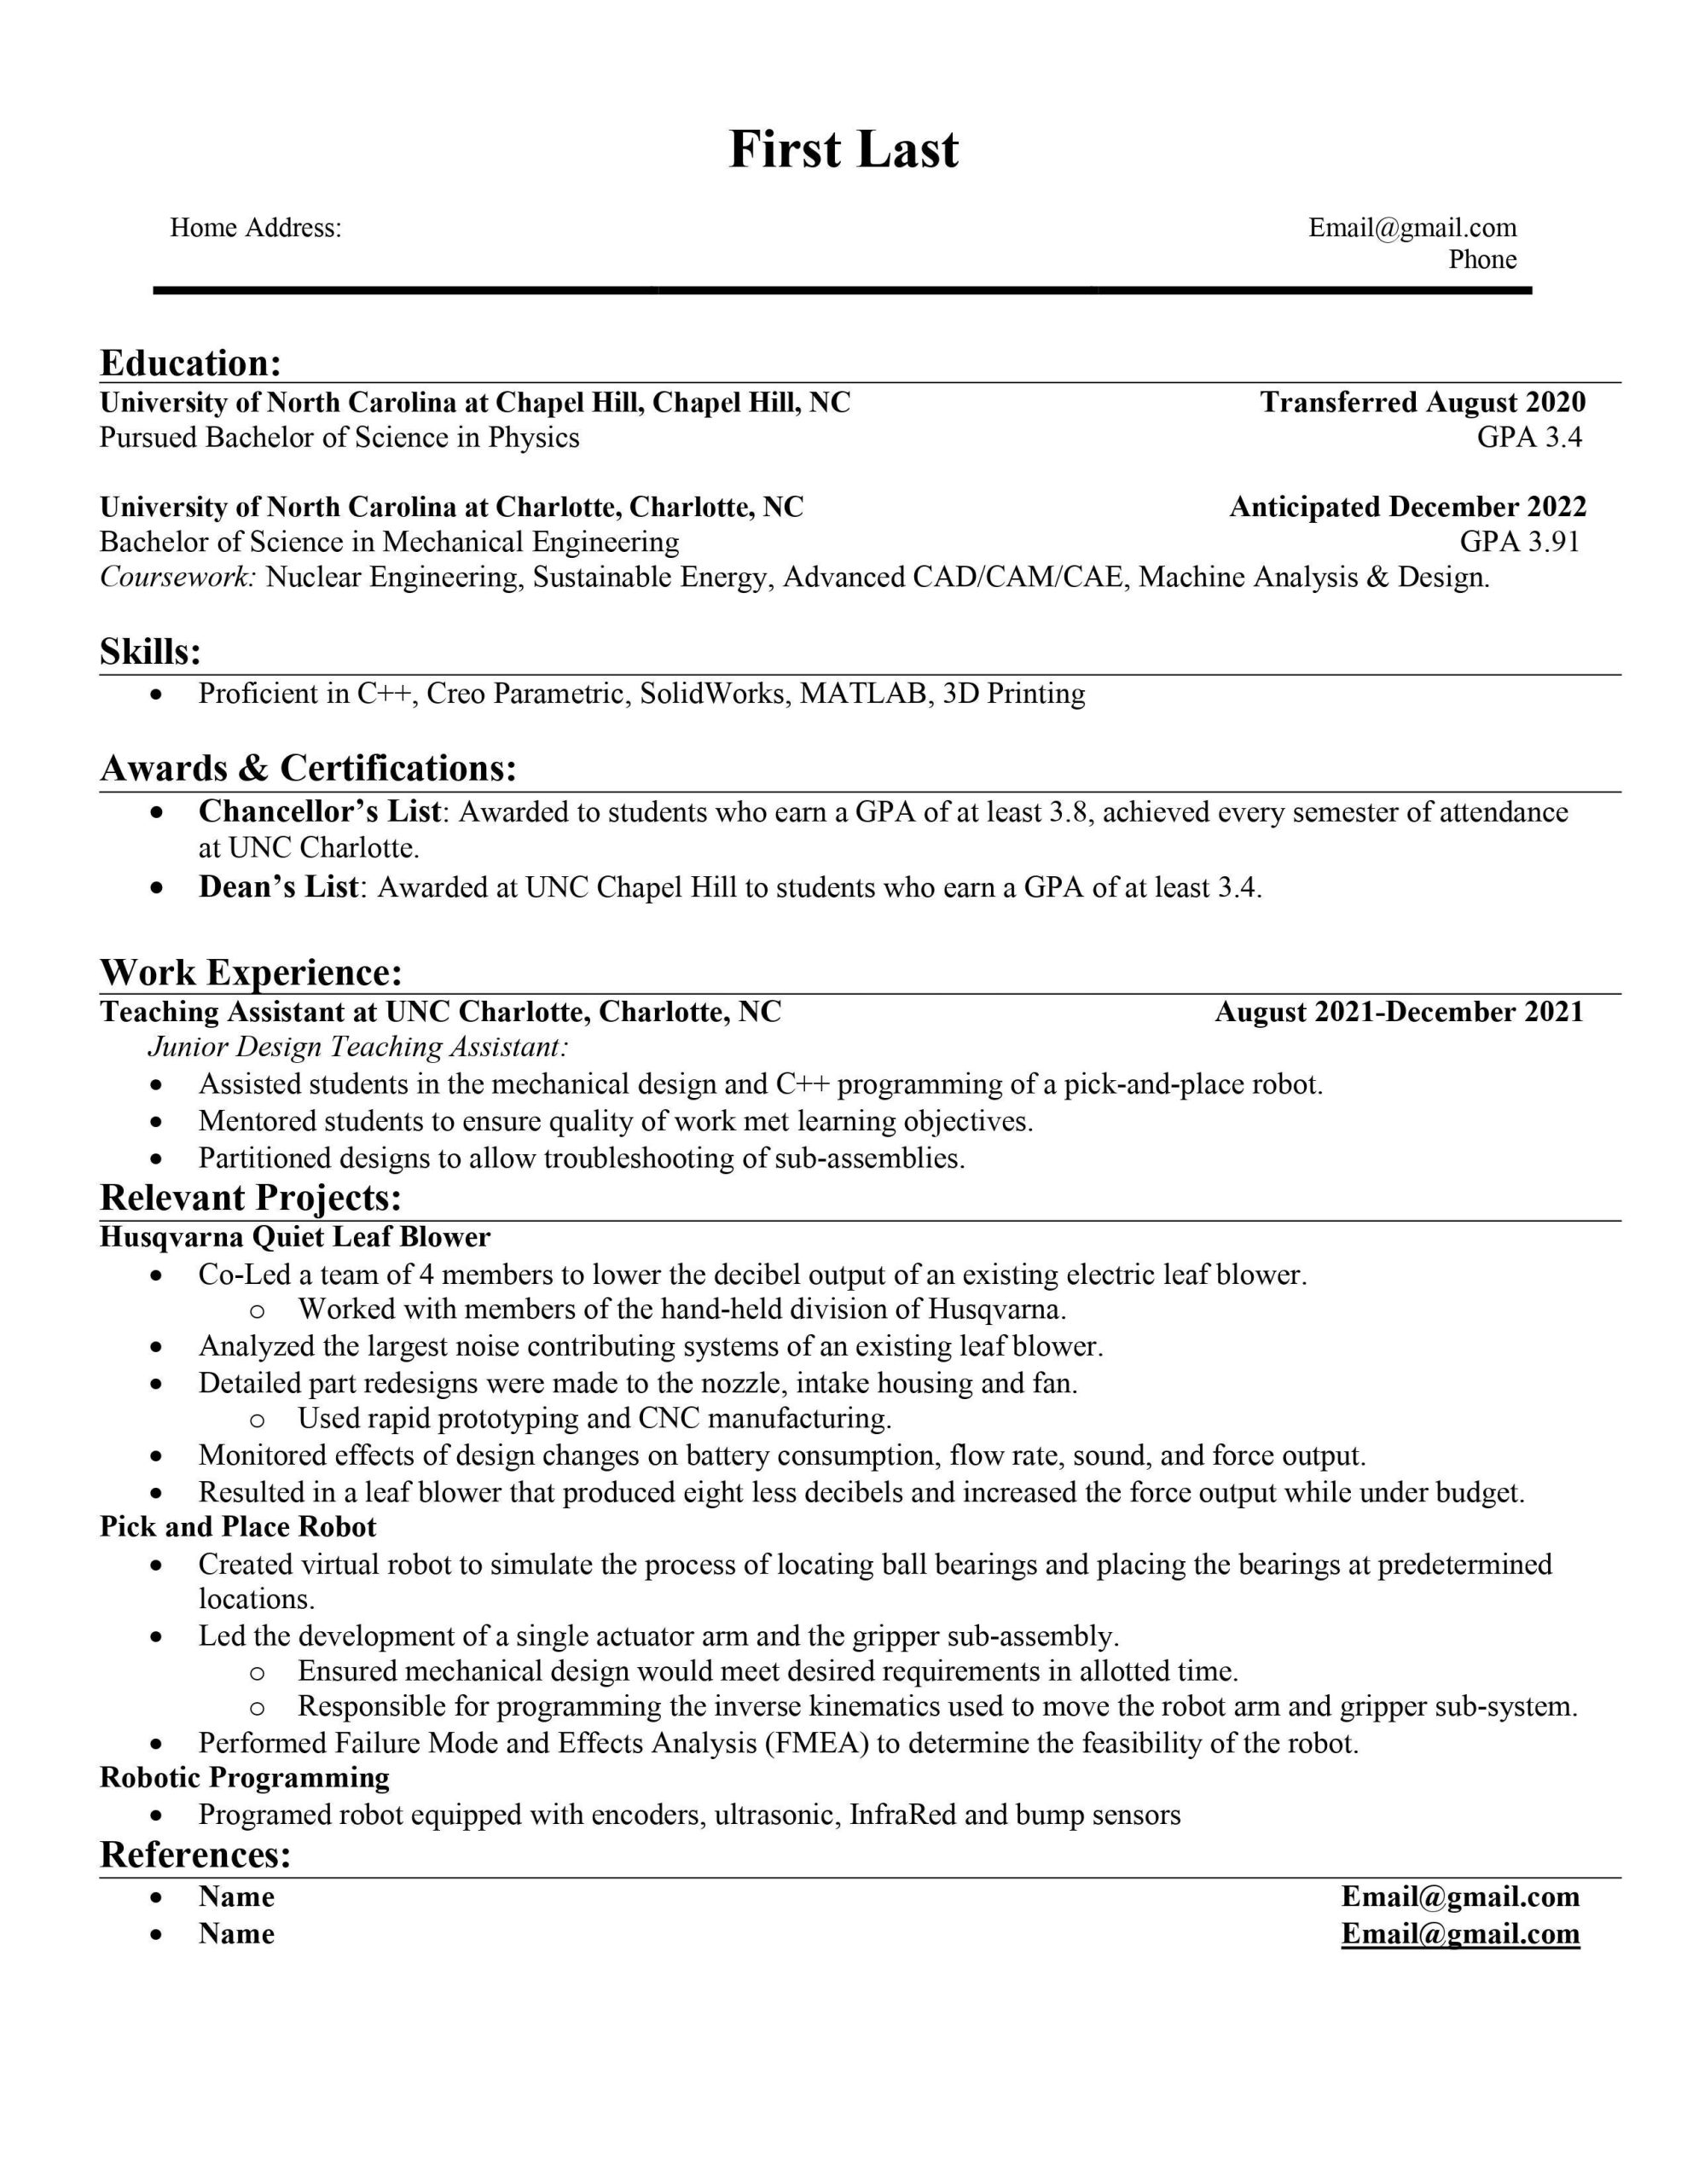 Sample Resume with Expected Graduation Date Me Expected Graduation In December 2022. Looking for Any Advice …